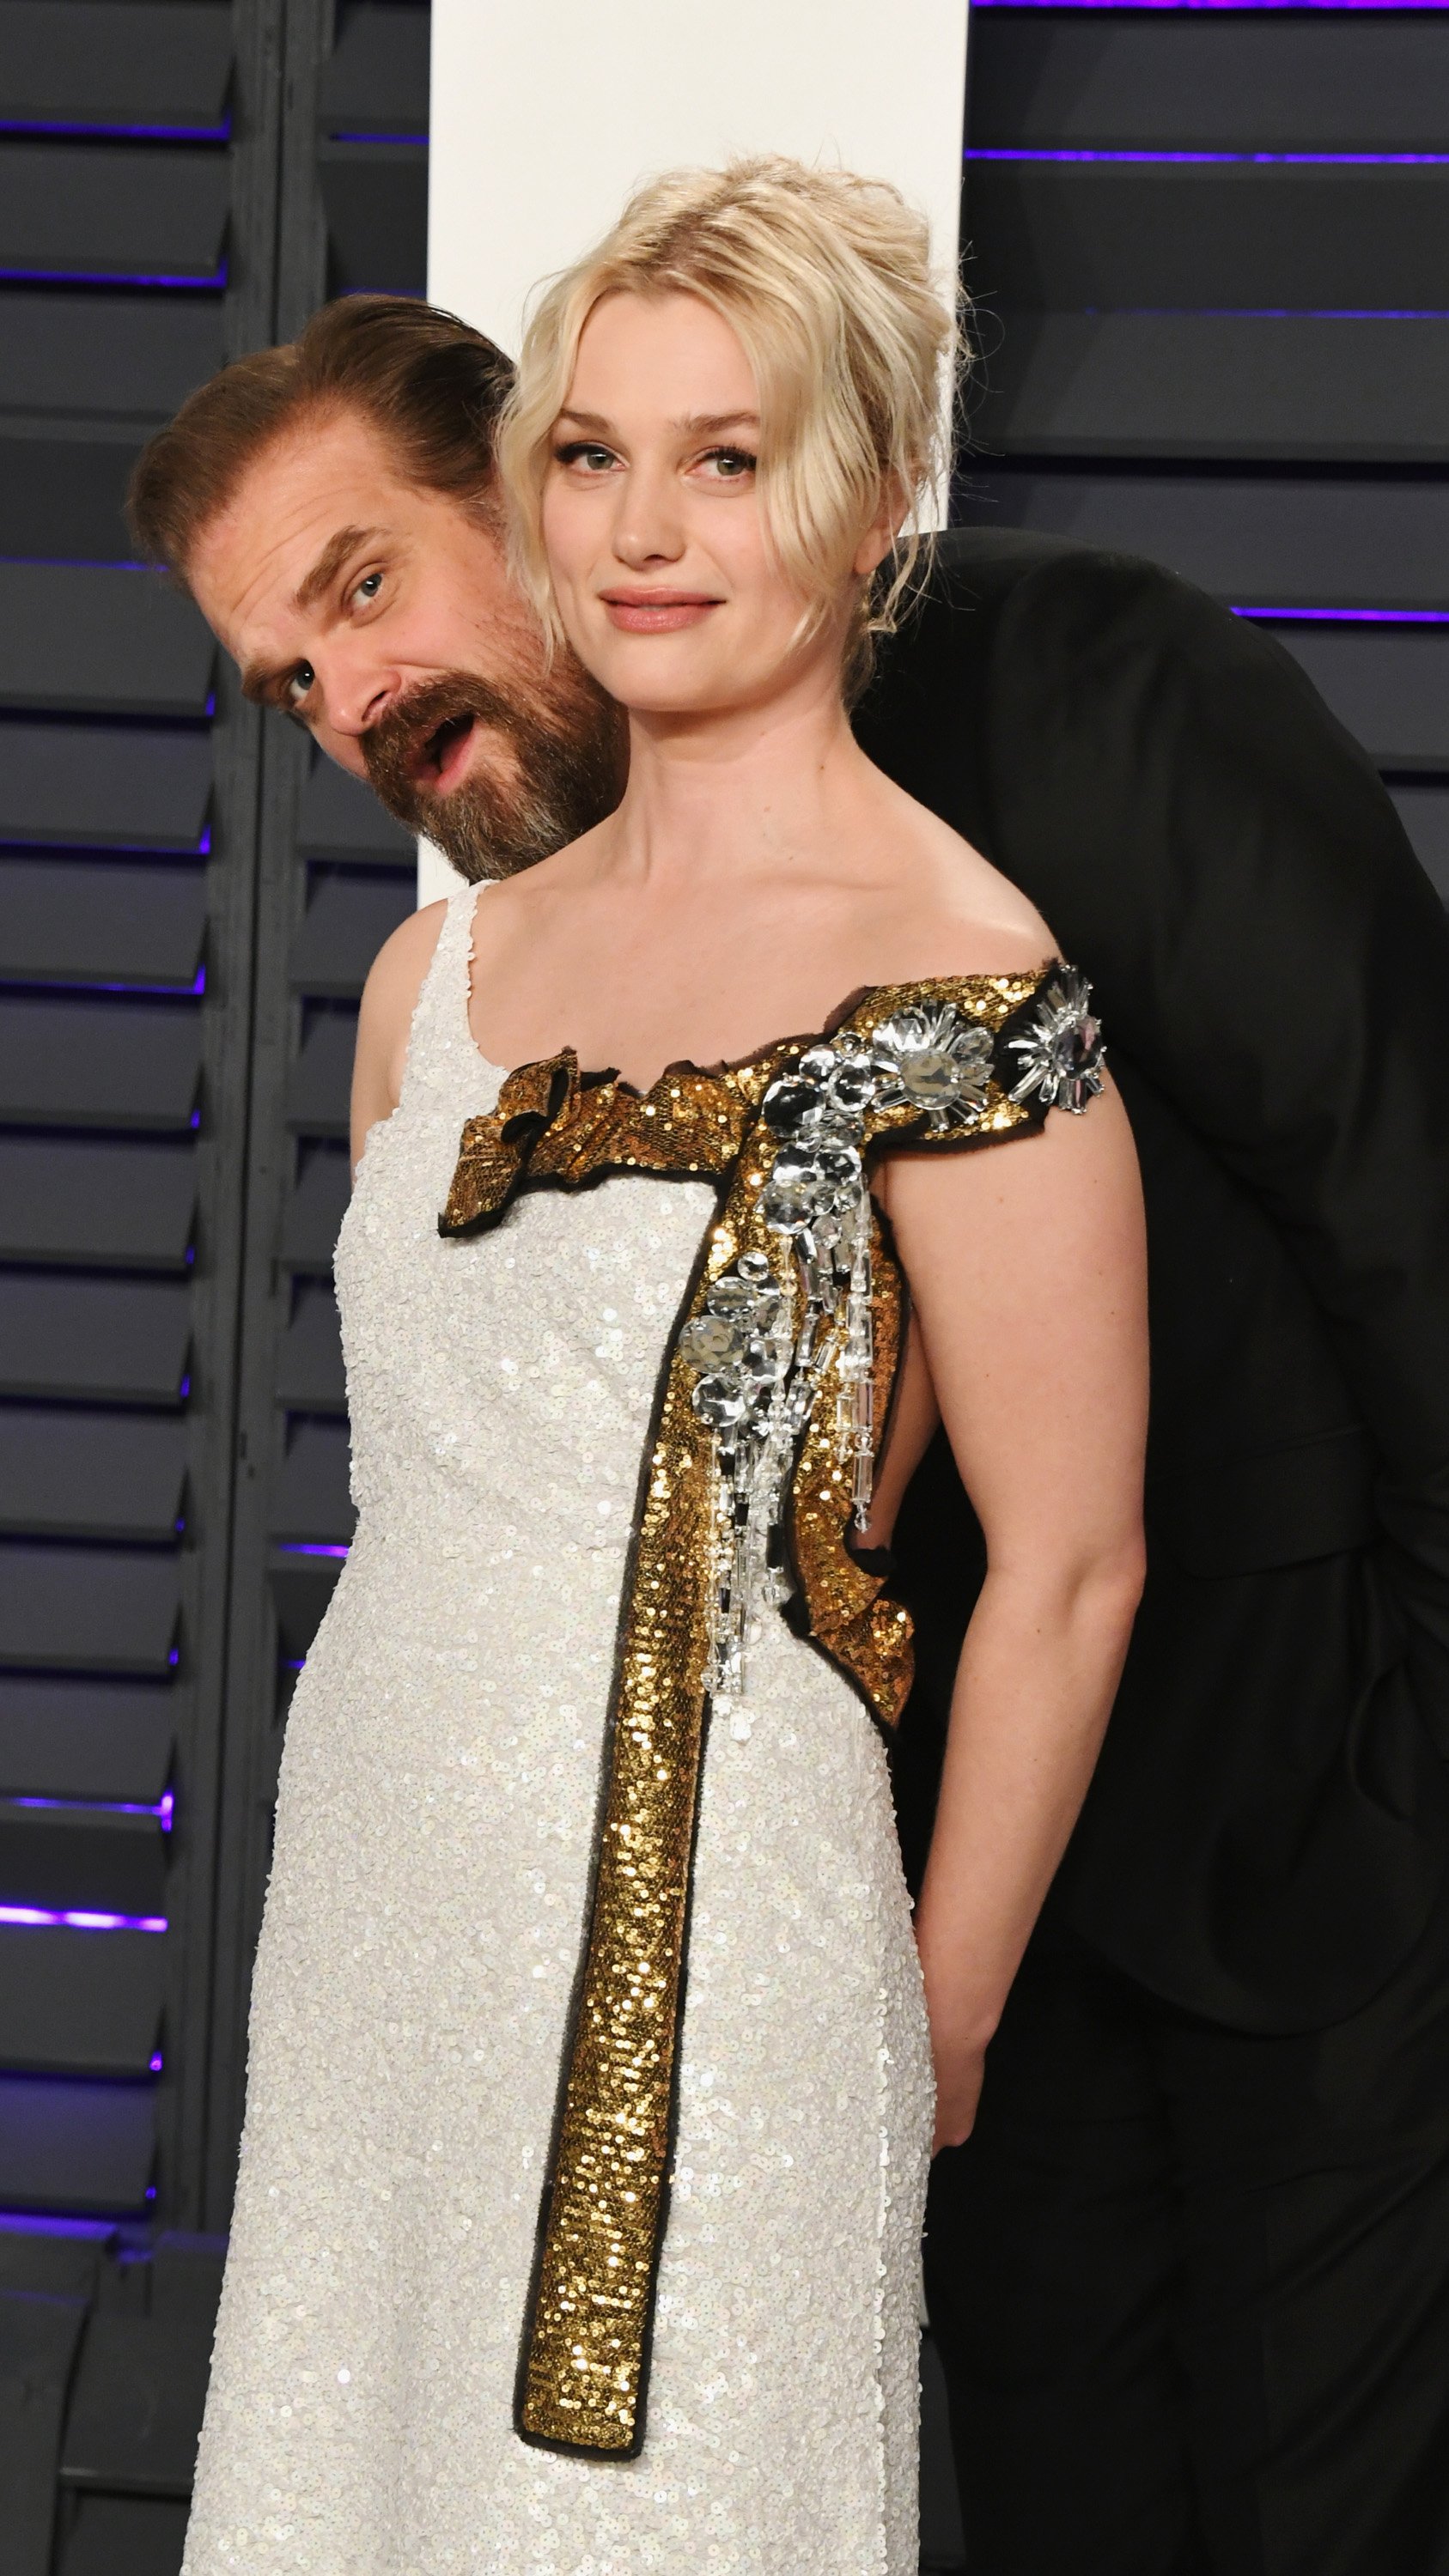 Alison Sudol and David Harbour at the 2019 Vanity Fair Oscar Party on February 24, 2019 | Source: Getty Images